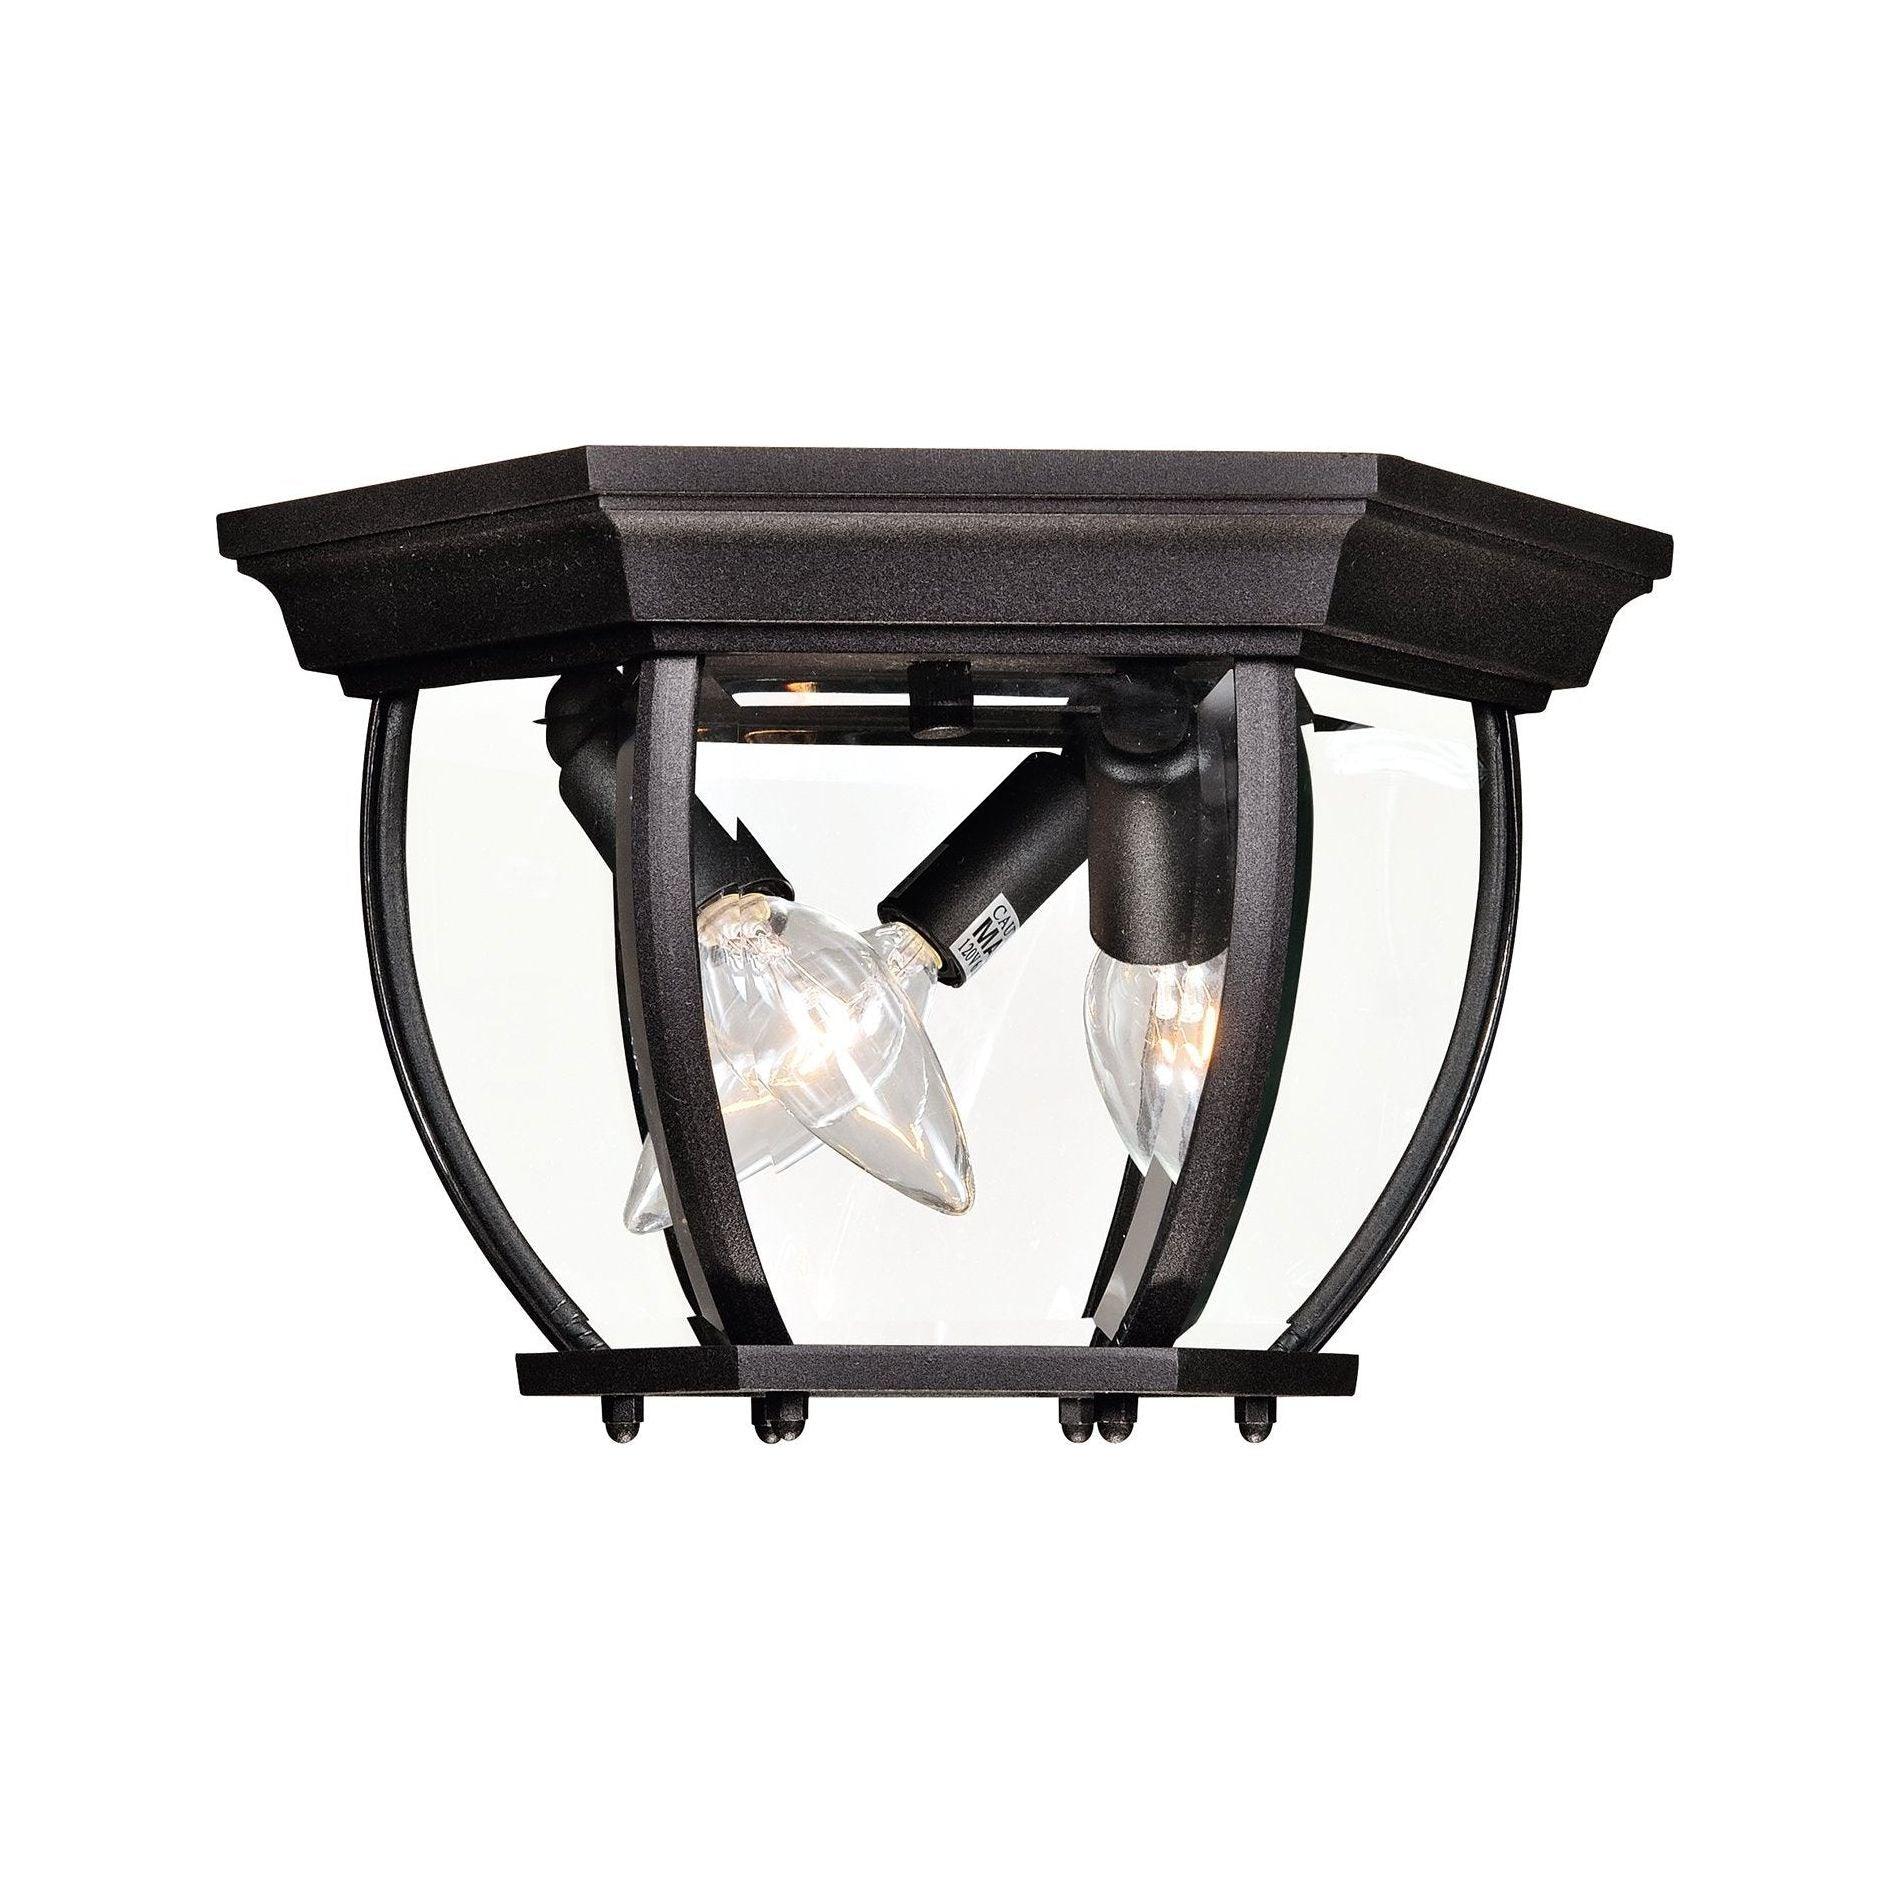 Savoy House - Exterior Collections Outdoor Ceiling Light - Lights Canada